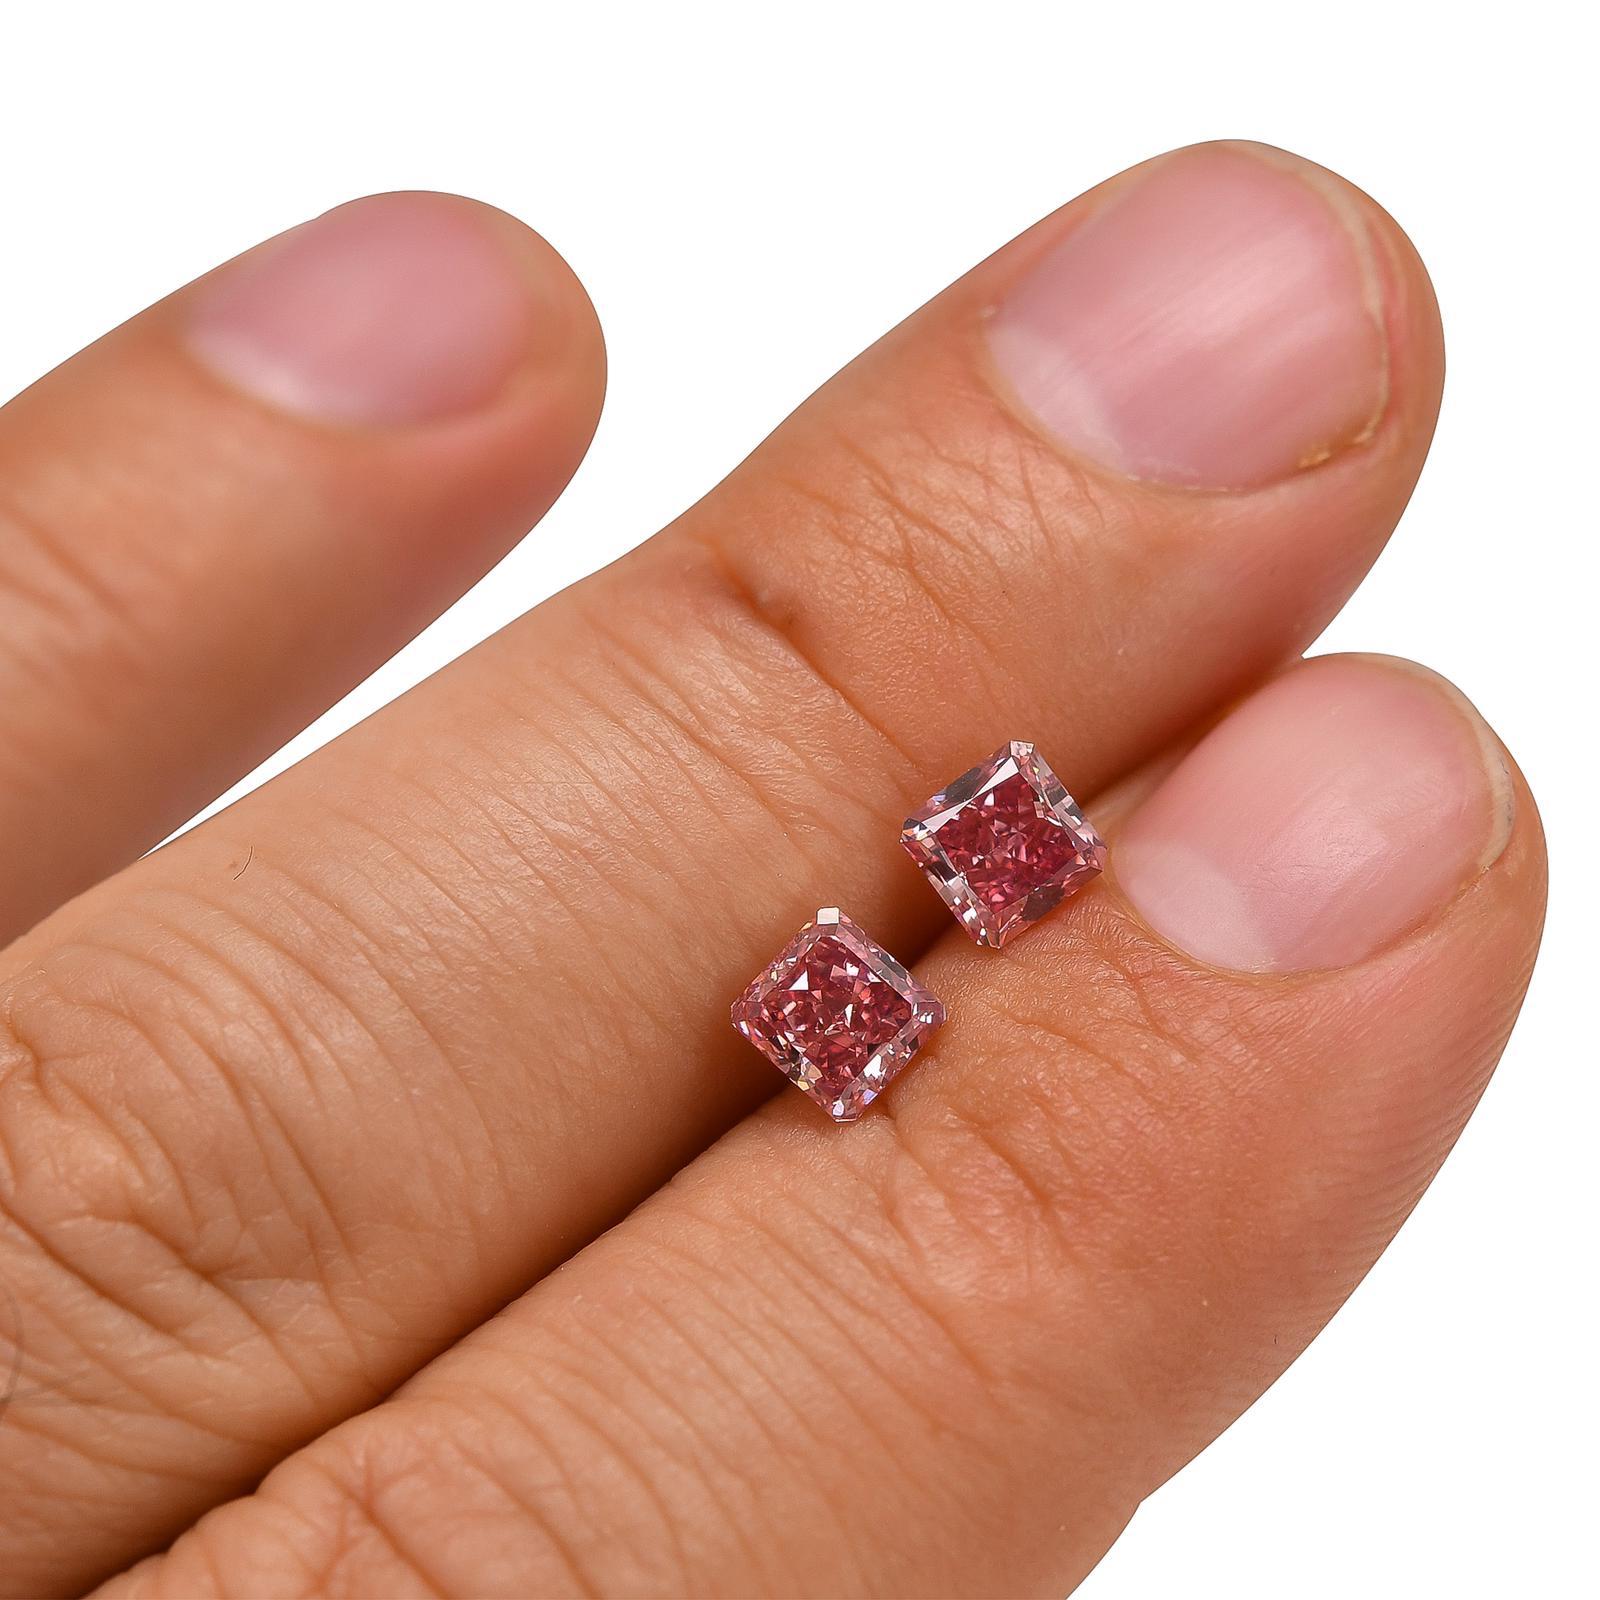 From the Emilio Jewelry Museum Vault, Showcasing a magnificent investment grade matched pair of Gia certified natural Vivid Pure Pink diamonds with absolutely no overtone. It is hard enough to find just one diamond like this, imagine a matched pair